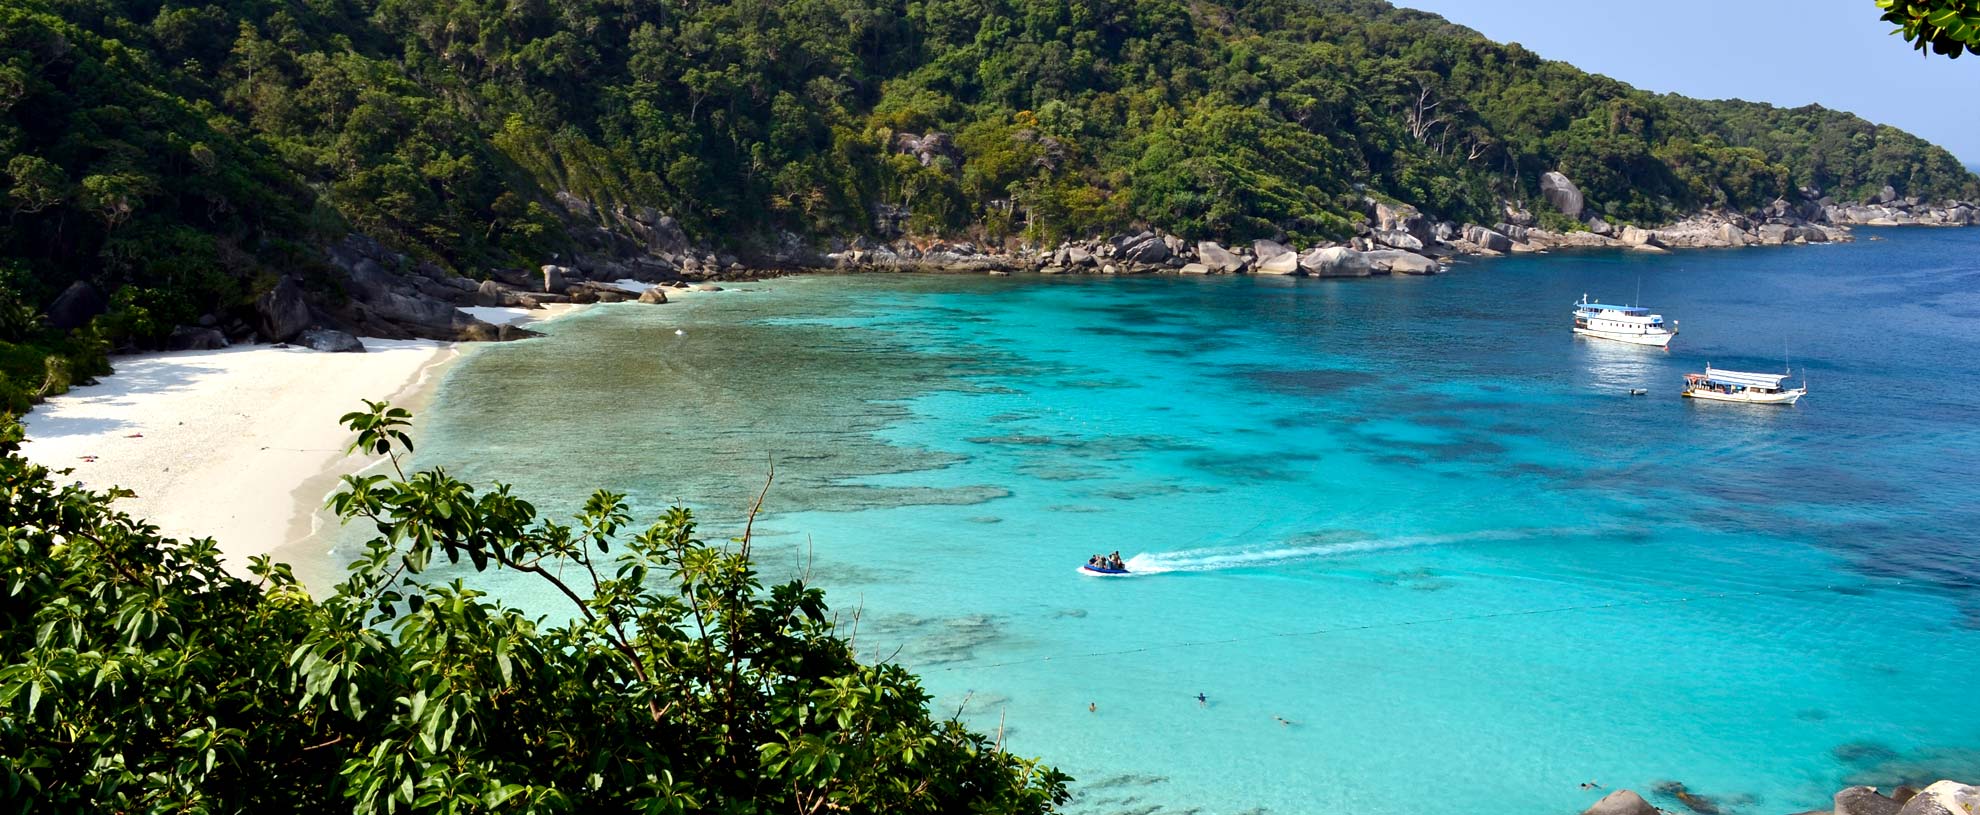 Donald Duck bay and  beach from Similan Island no.8 lookout